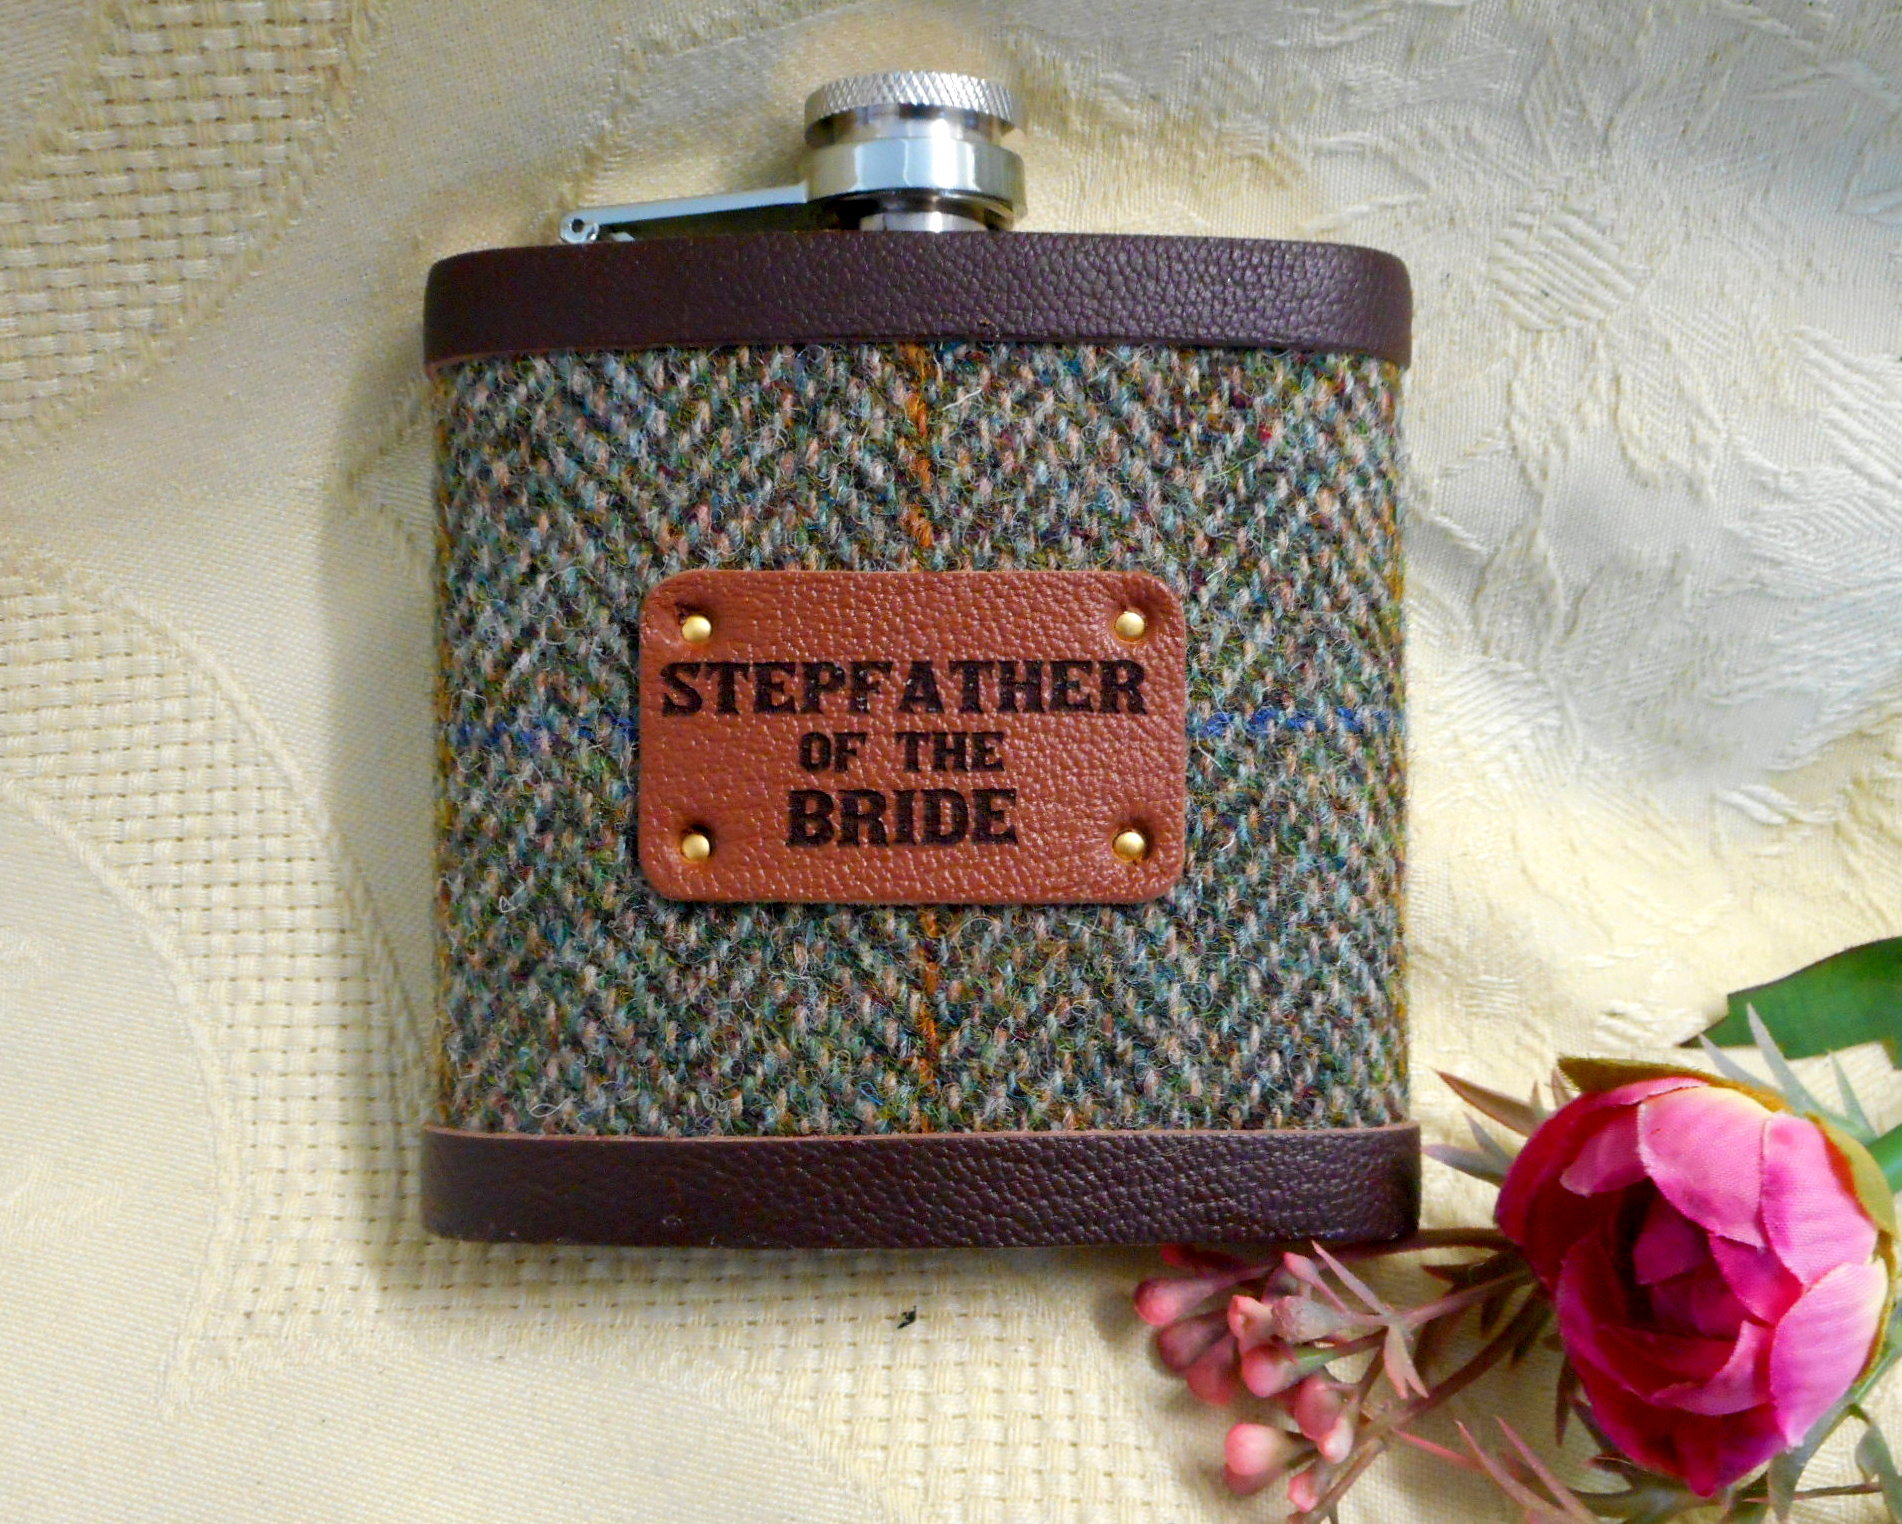 Stepfather of the Bride or Groom wedding gift Harris Tweed hip flask with leather trim, choice of many tweeds, personalized gift